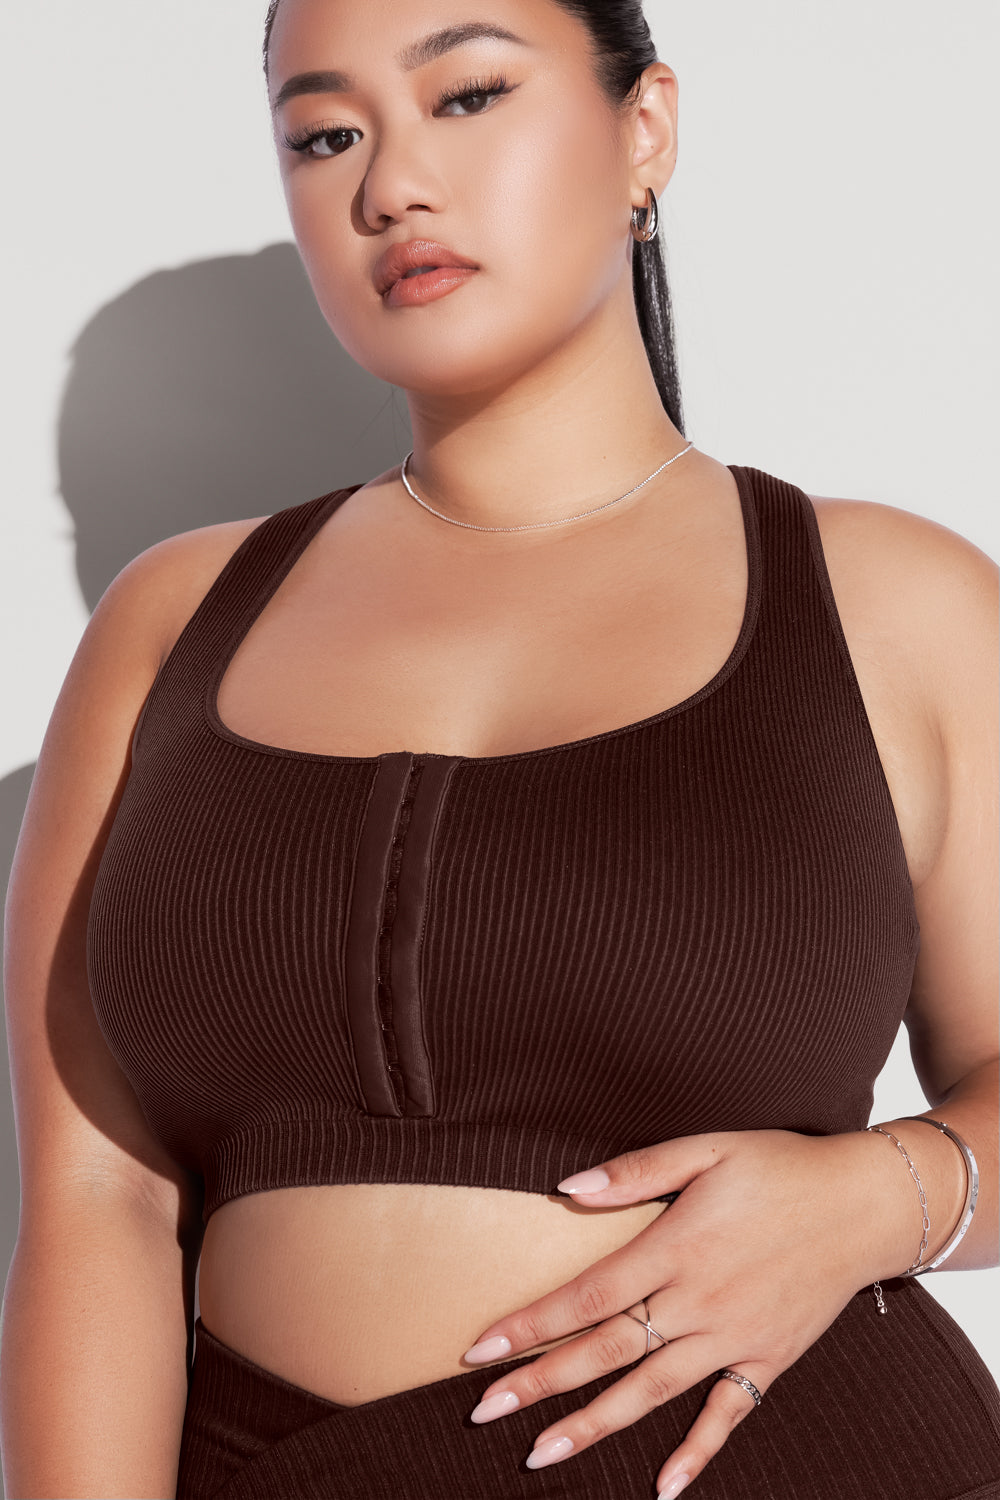 Able2Wear - With easy-fastening poppers along the front panel, our  Front-Fastening Bras are a great solution for those with limited hand  dexterity or arthritis. Made from breathable cotton and with padded shoulder